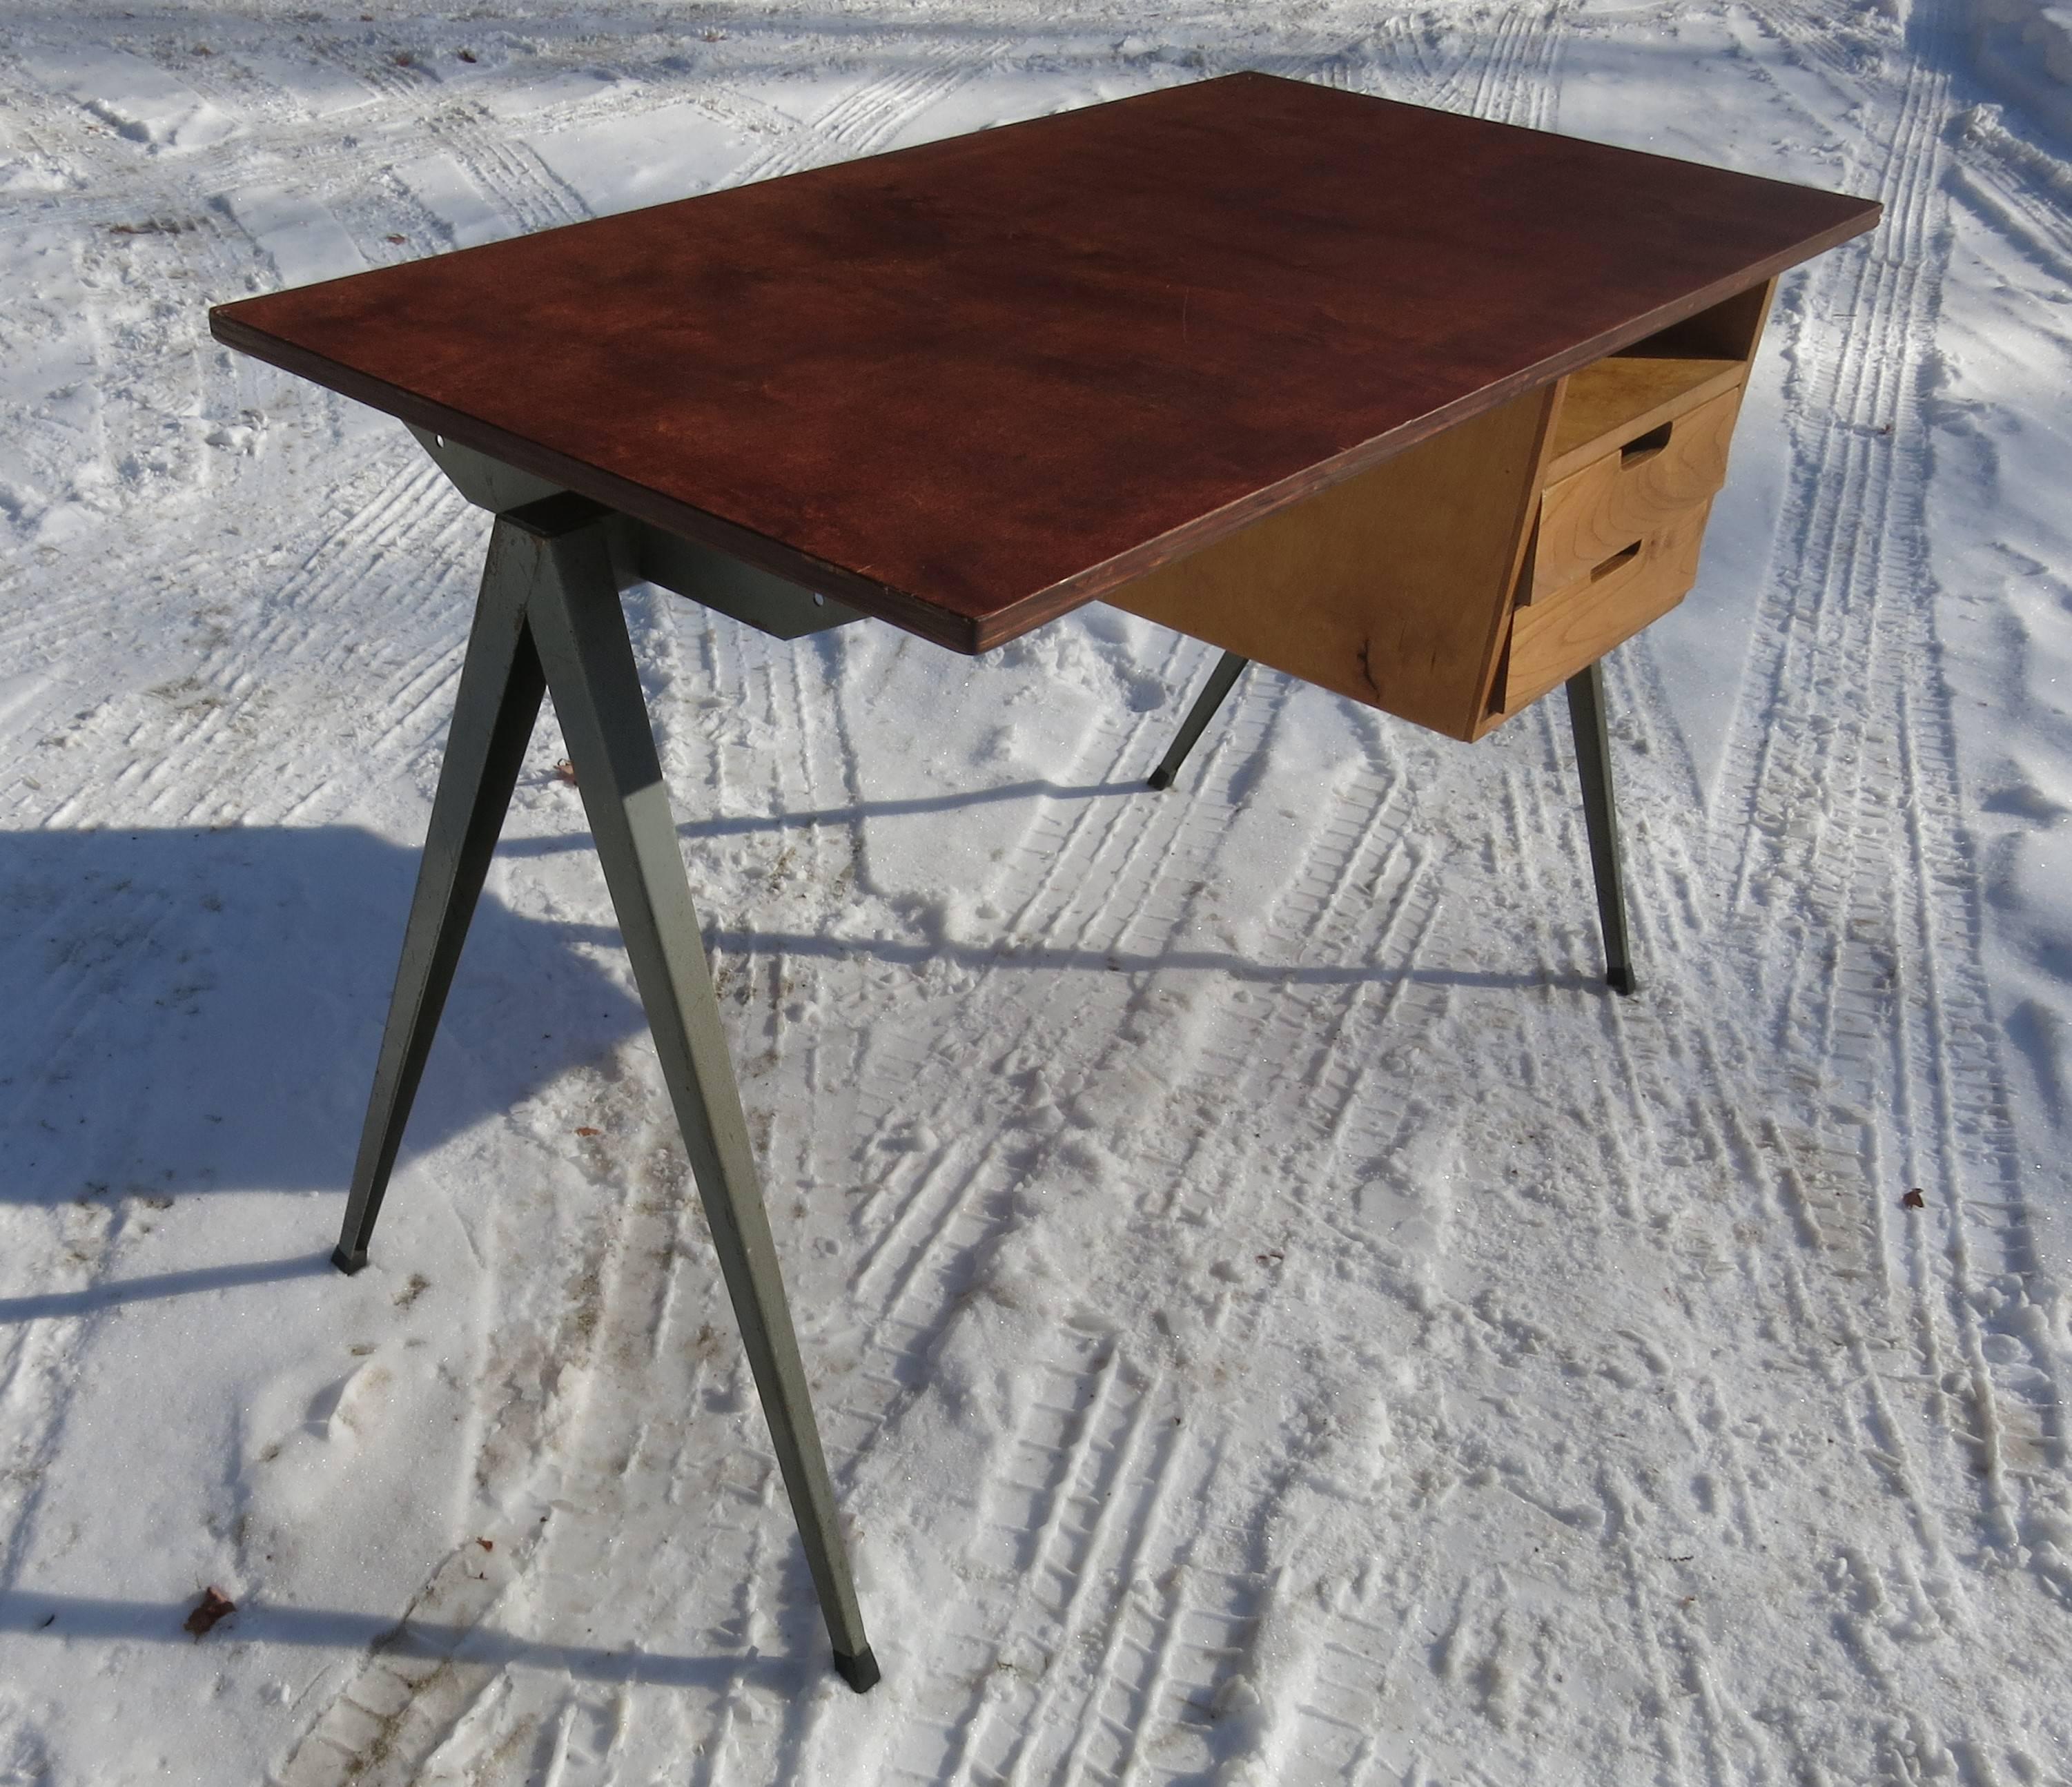 Vintage 1950s Marko desk, made in the Netherlands. Nice minimalist style Dutch desk with plywood top. A few dings and chips on the top and light rust on the legs, it is 23.5